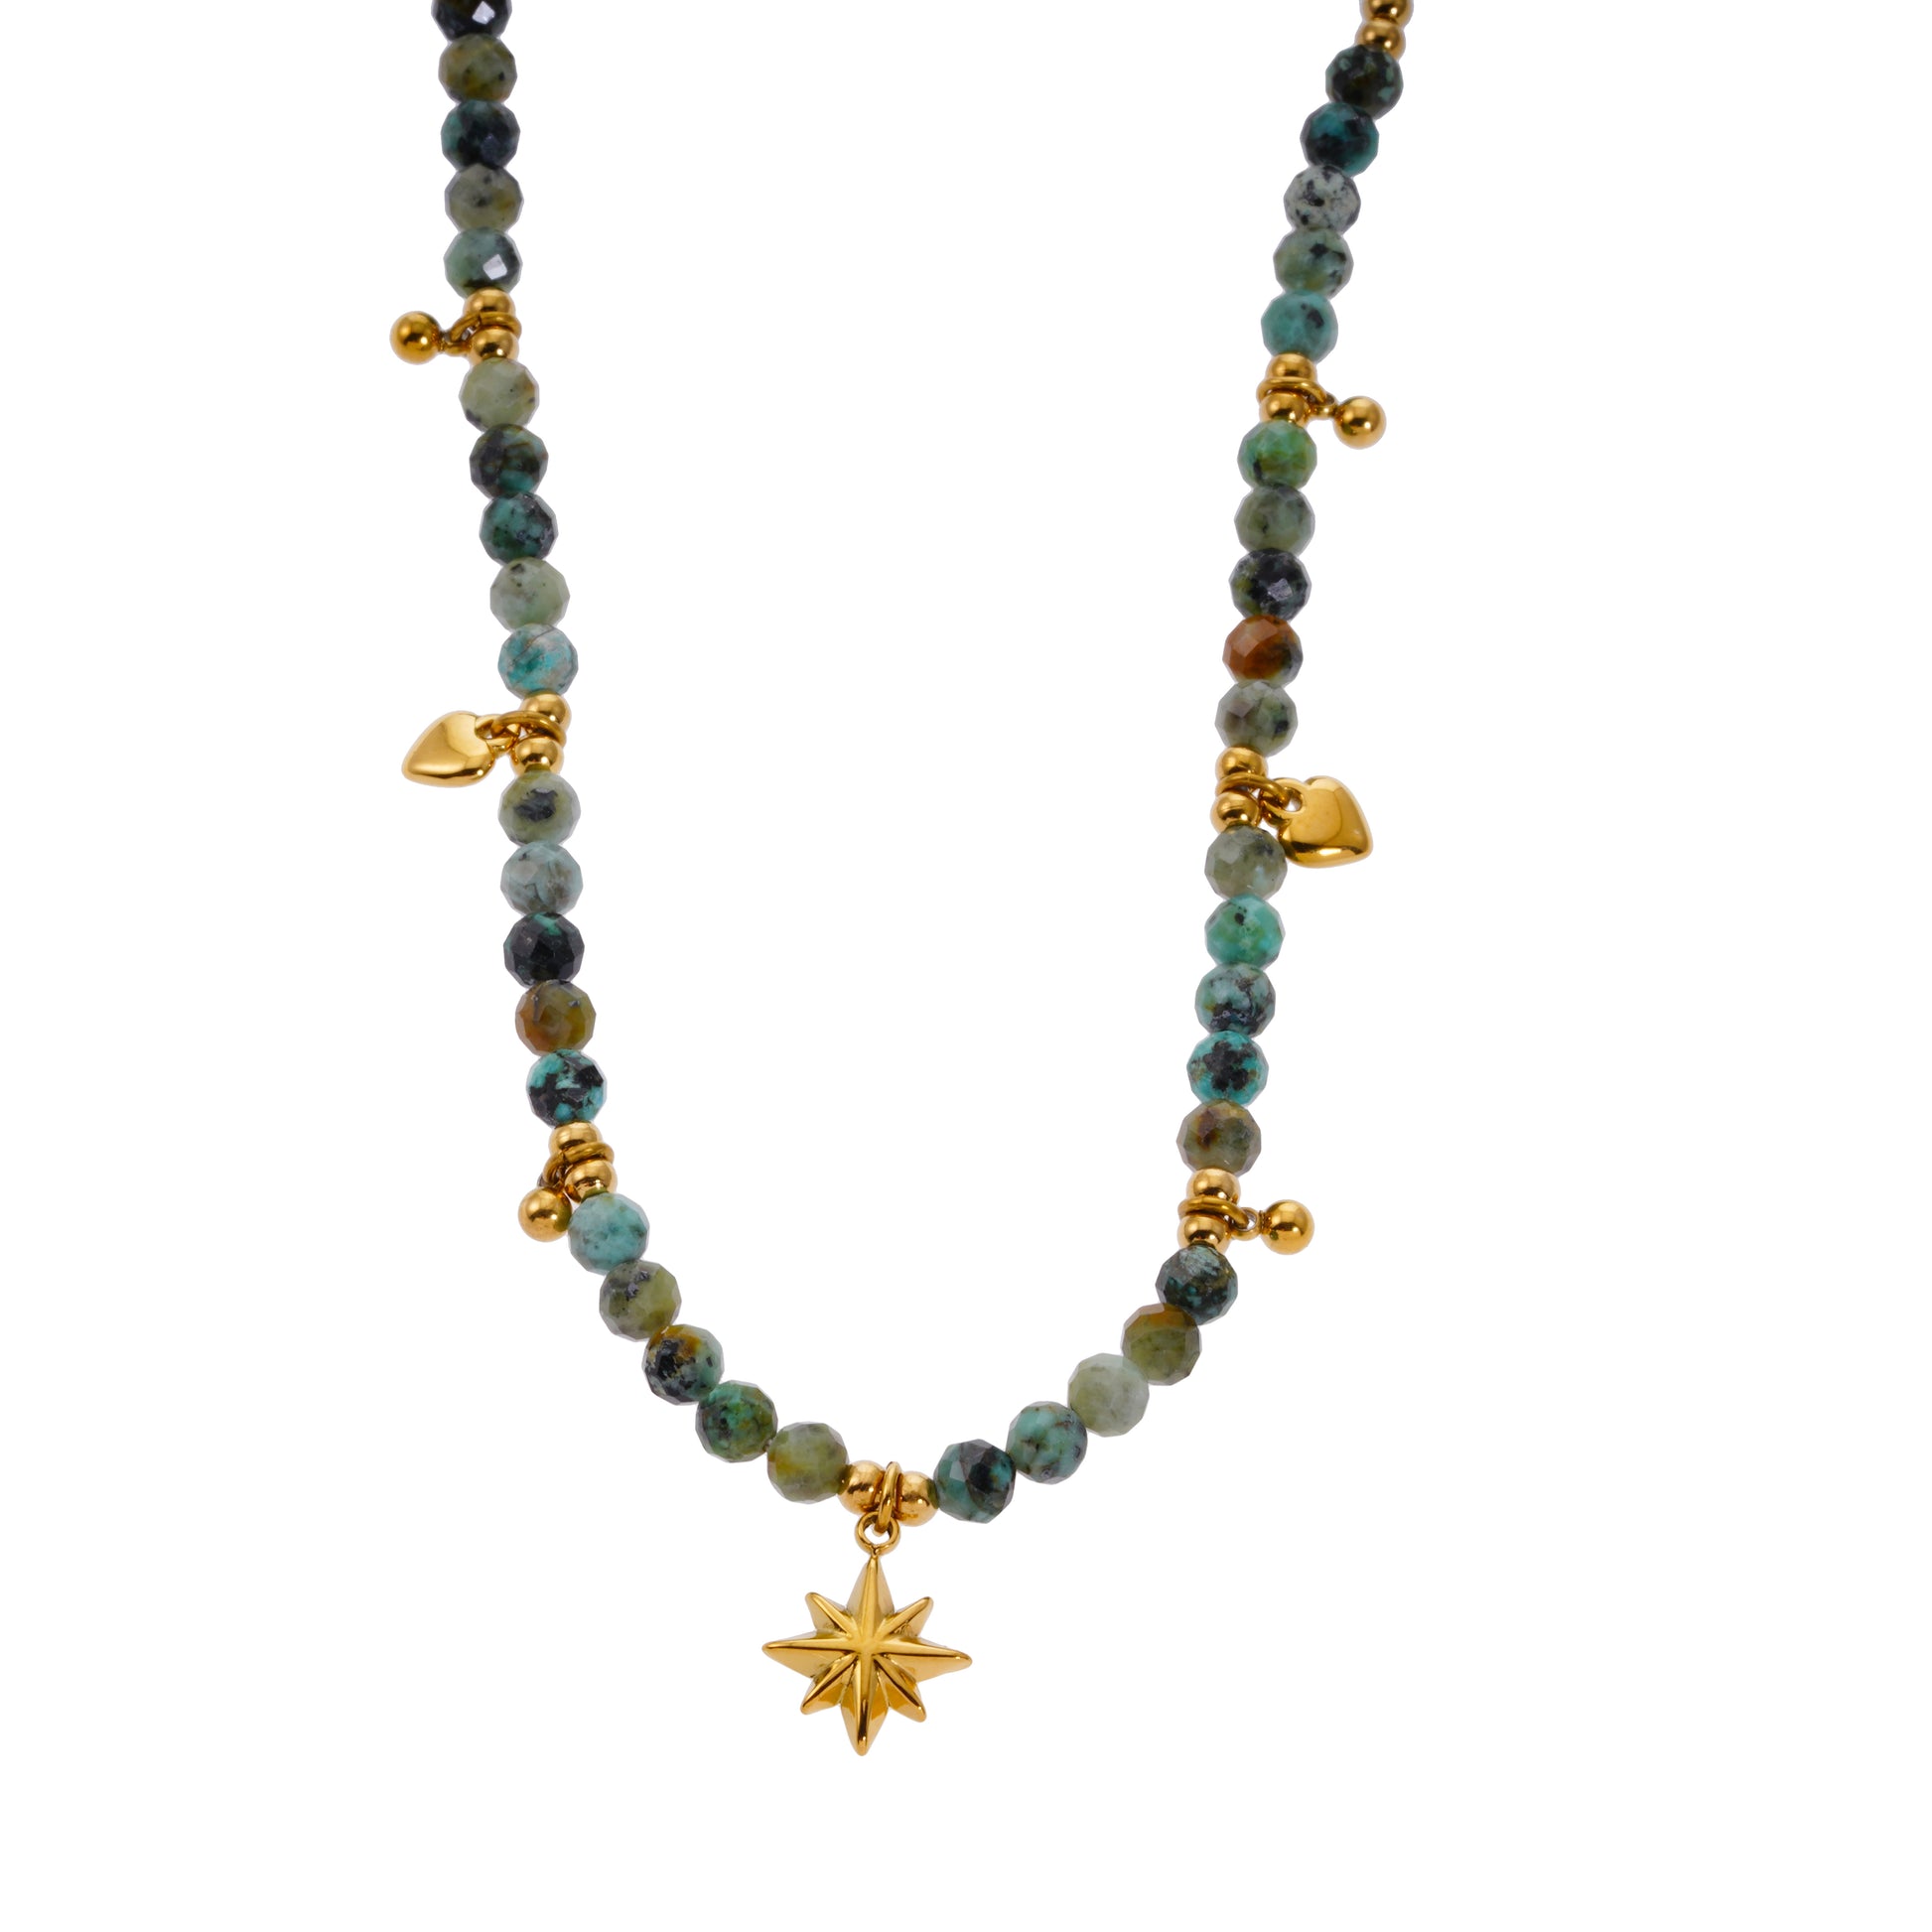 Style GITANJI 7871: Blue Turquoise Stones with Gold Beads & Charms Chain Necklace